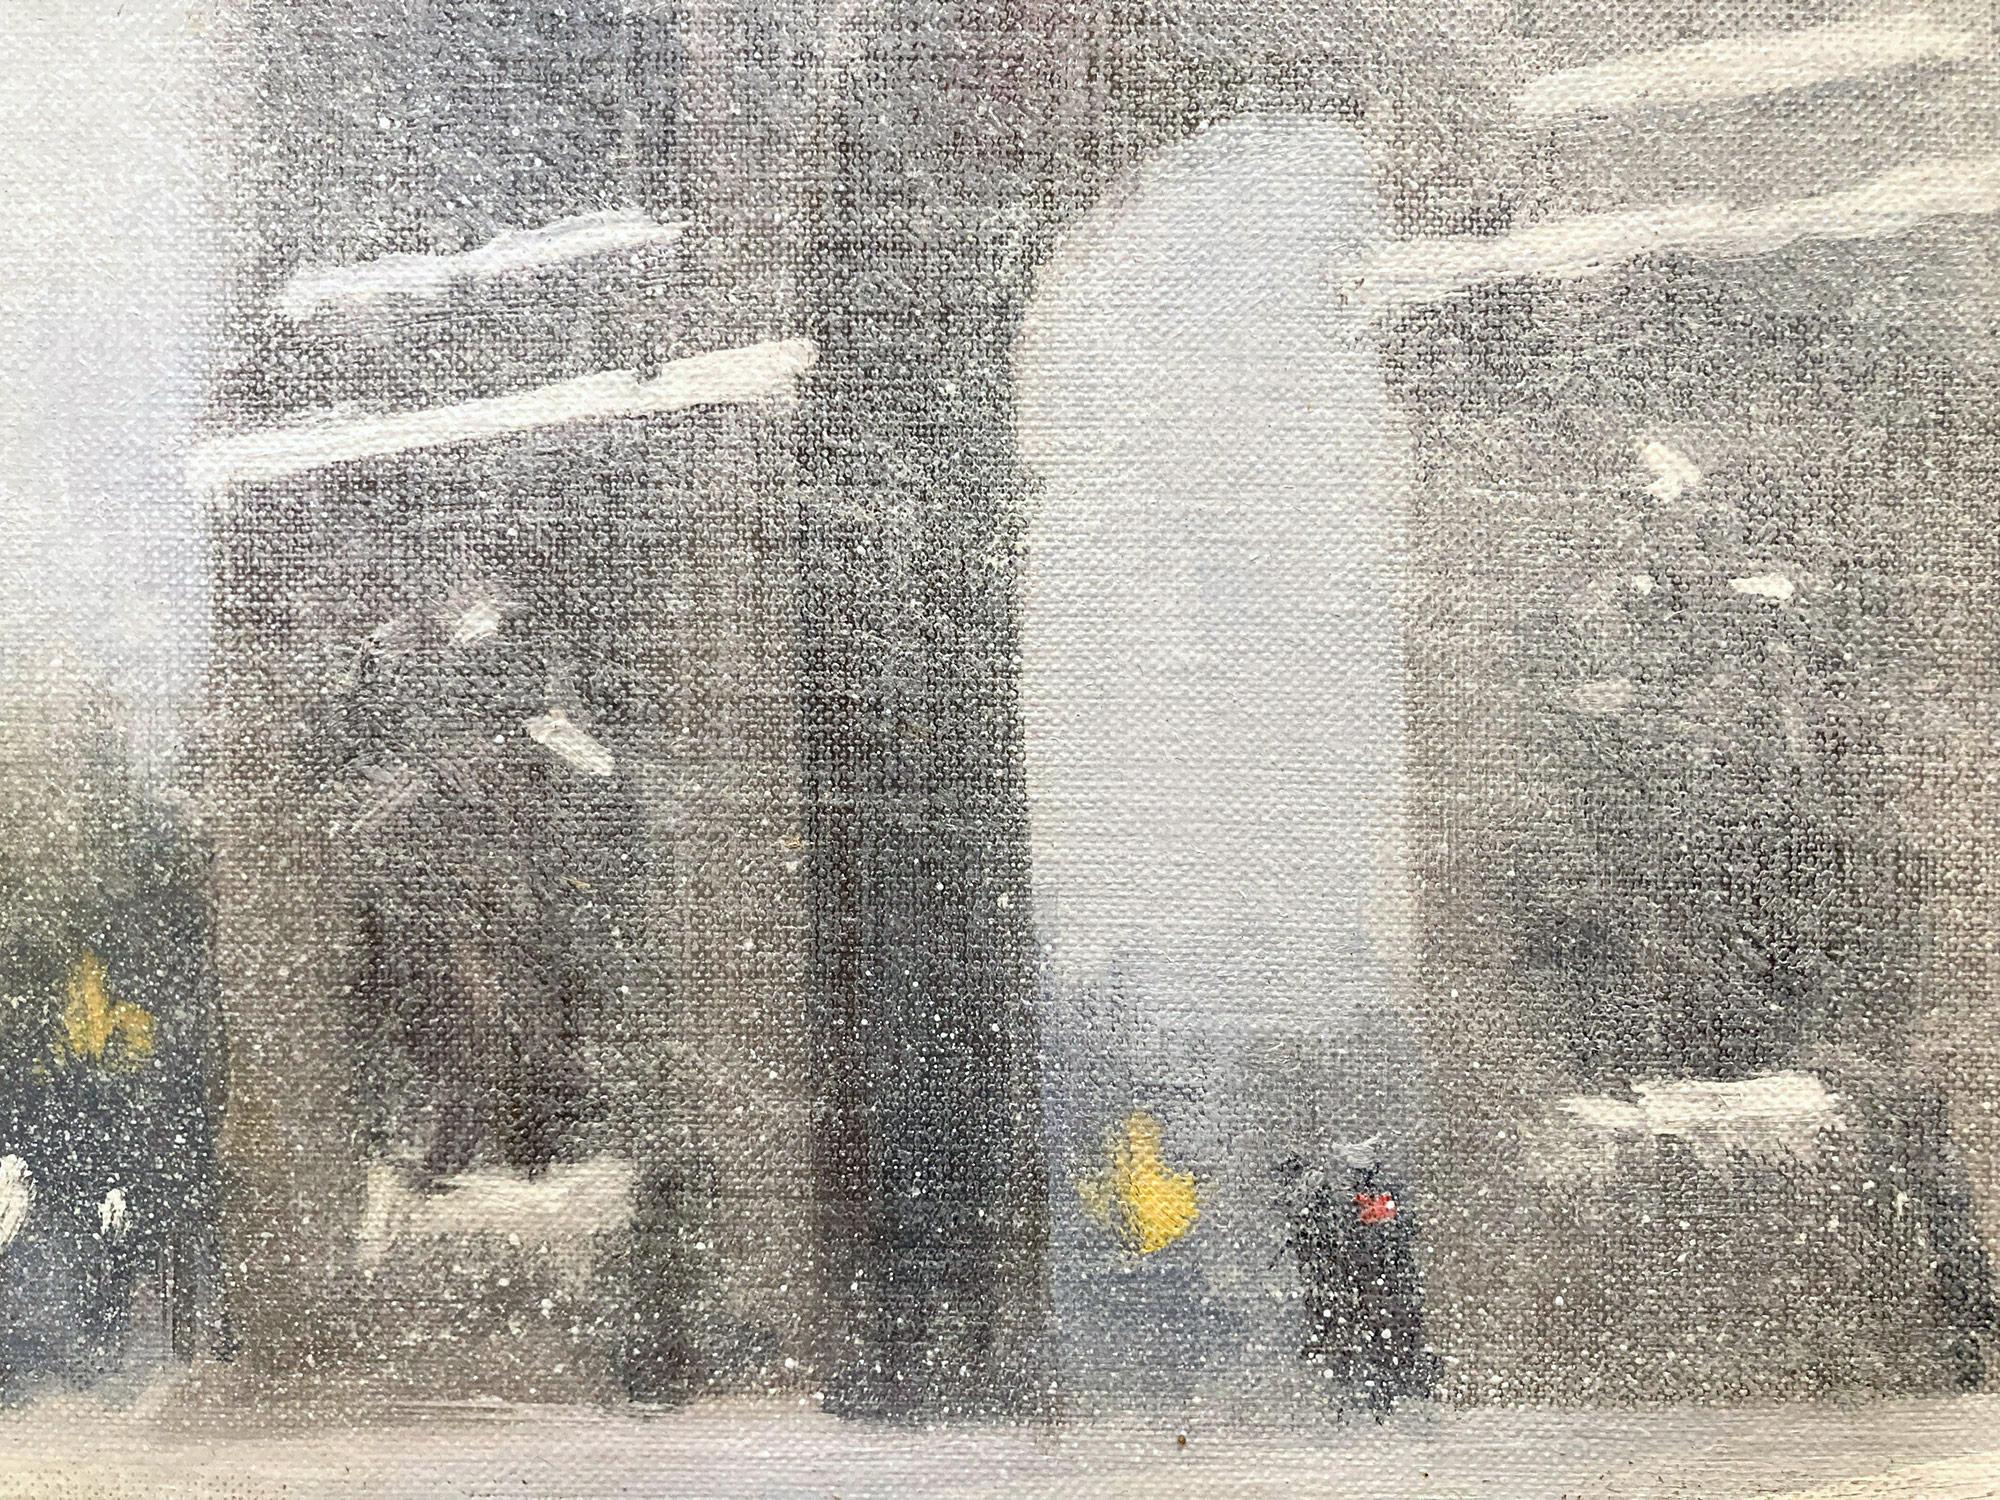 A charming depiction of Snow in New York City by Washington Square Park on a cold snowy evening with city lights and buildings captured in the distance. A cozy impressionistic scene with wonderful use of light and thick textured oil paint. This